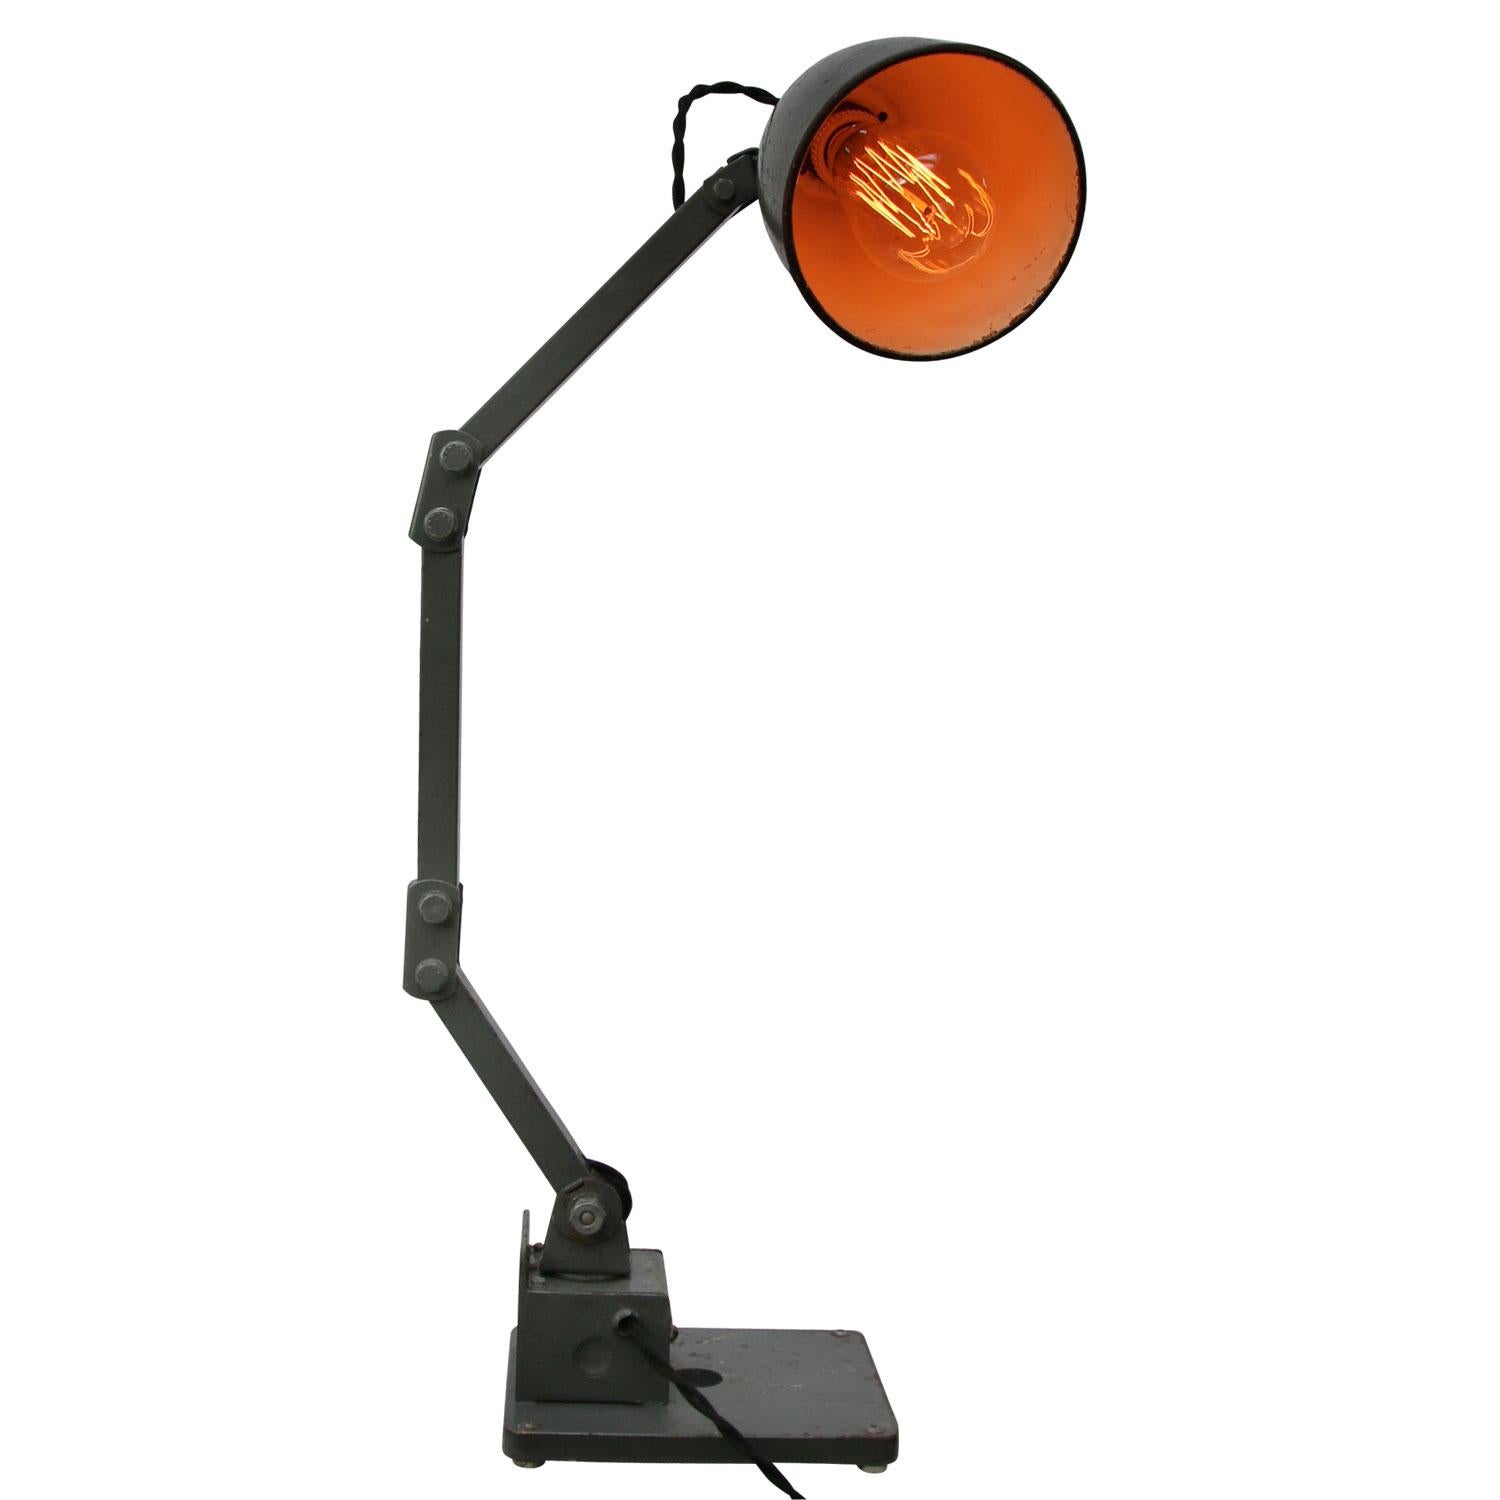 Grey blue industrial 3-arm work light by Memlite, UK
adjustable in height and angle
including plug and switch

Weight: 5.50 kg / 12.1 lb

Priced per individual item. All lamps have been made suitable by international standards for incandescent